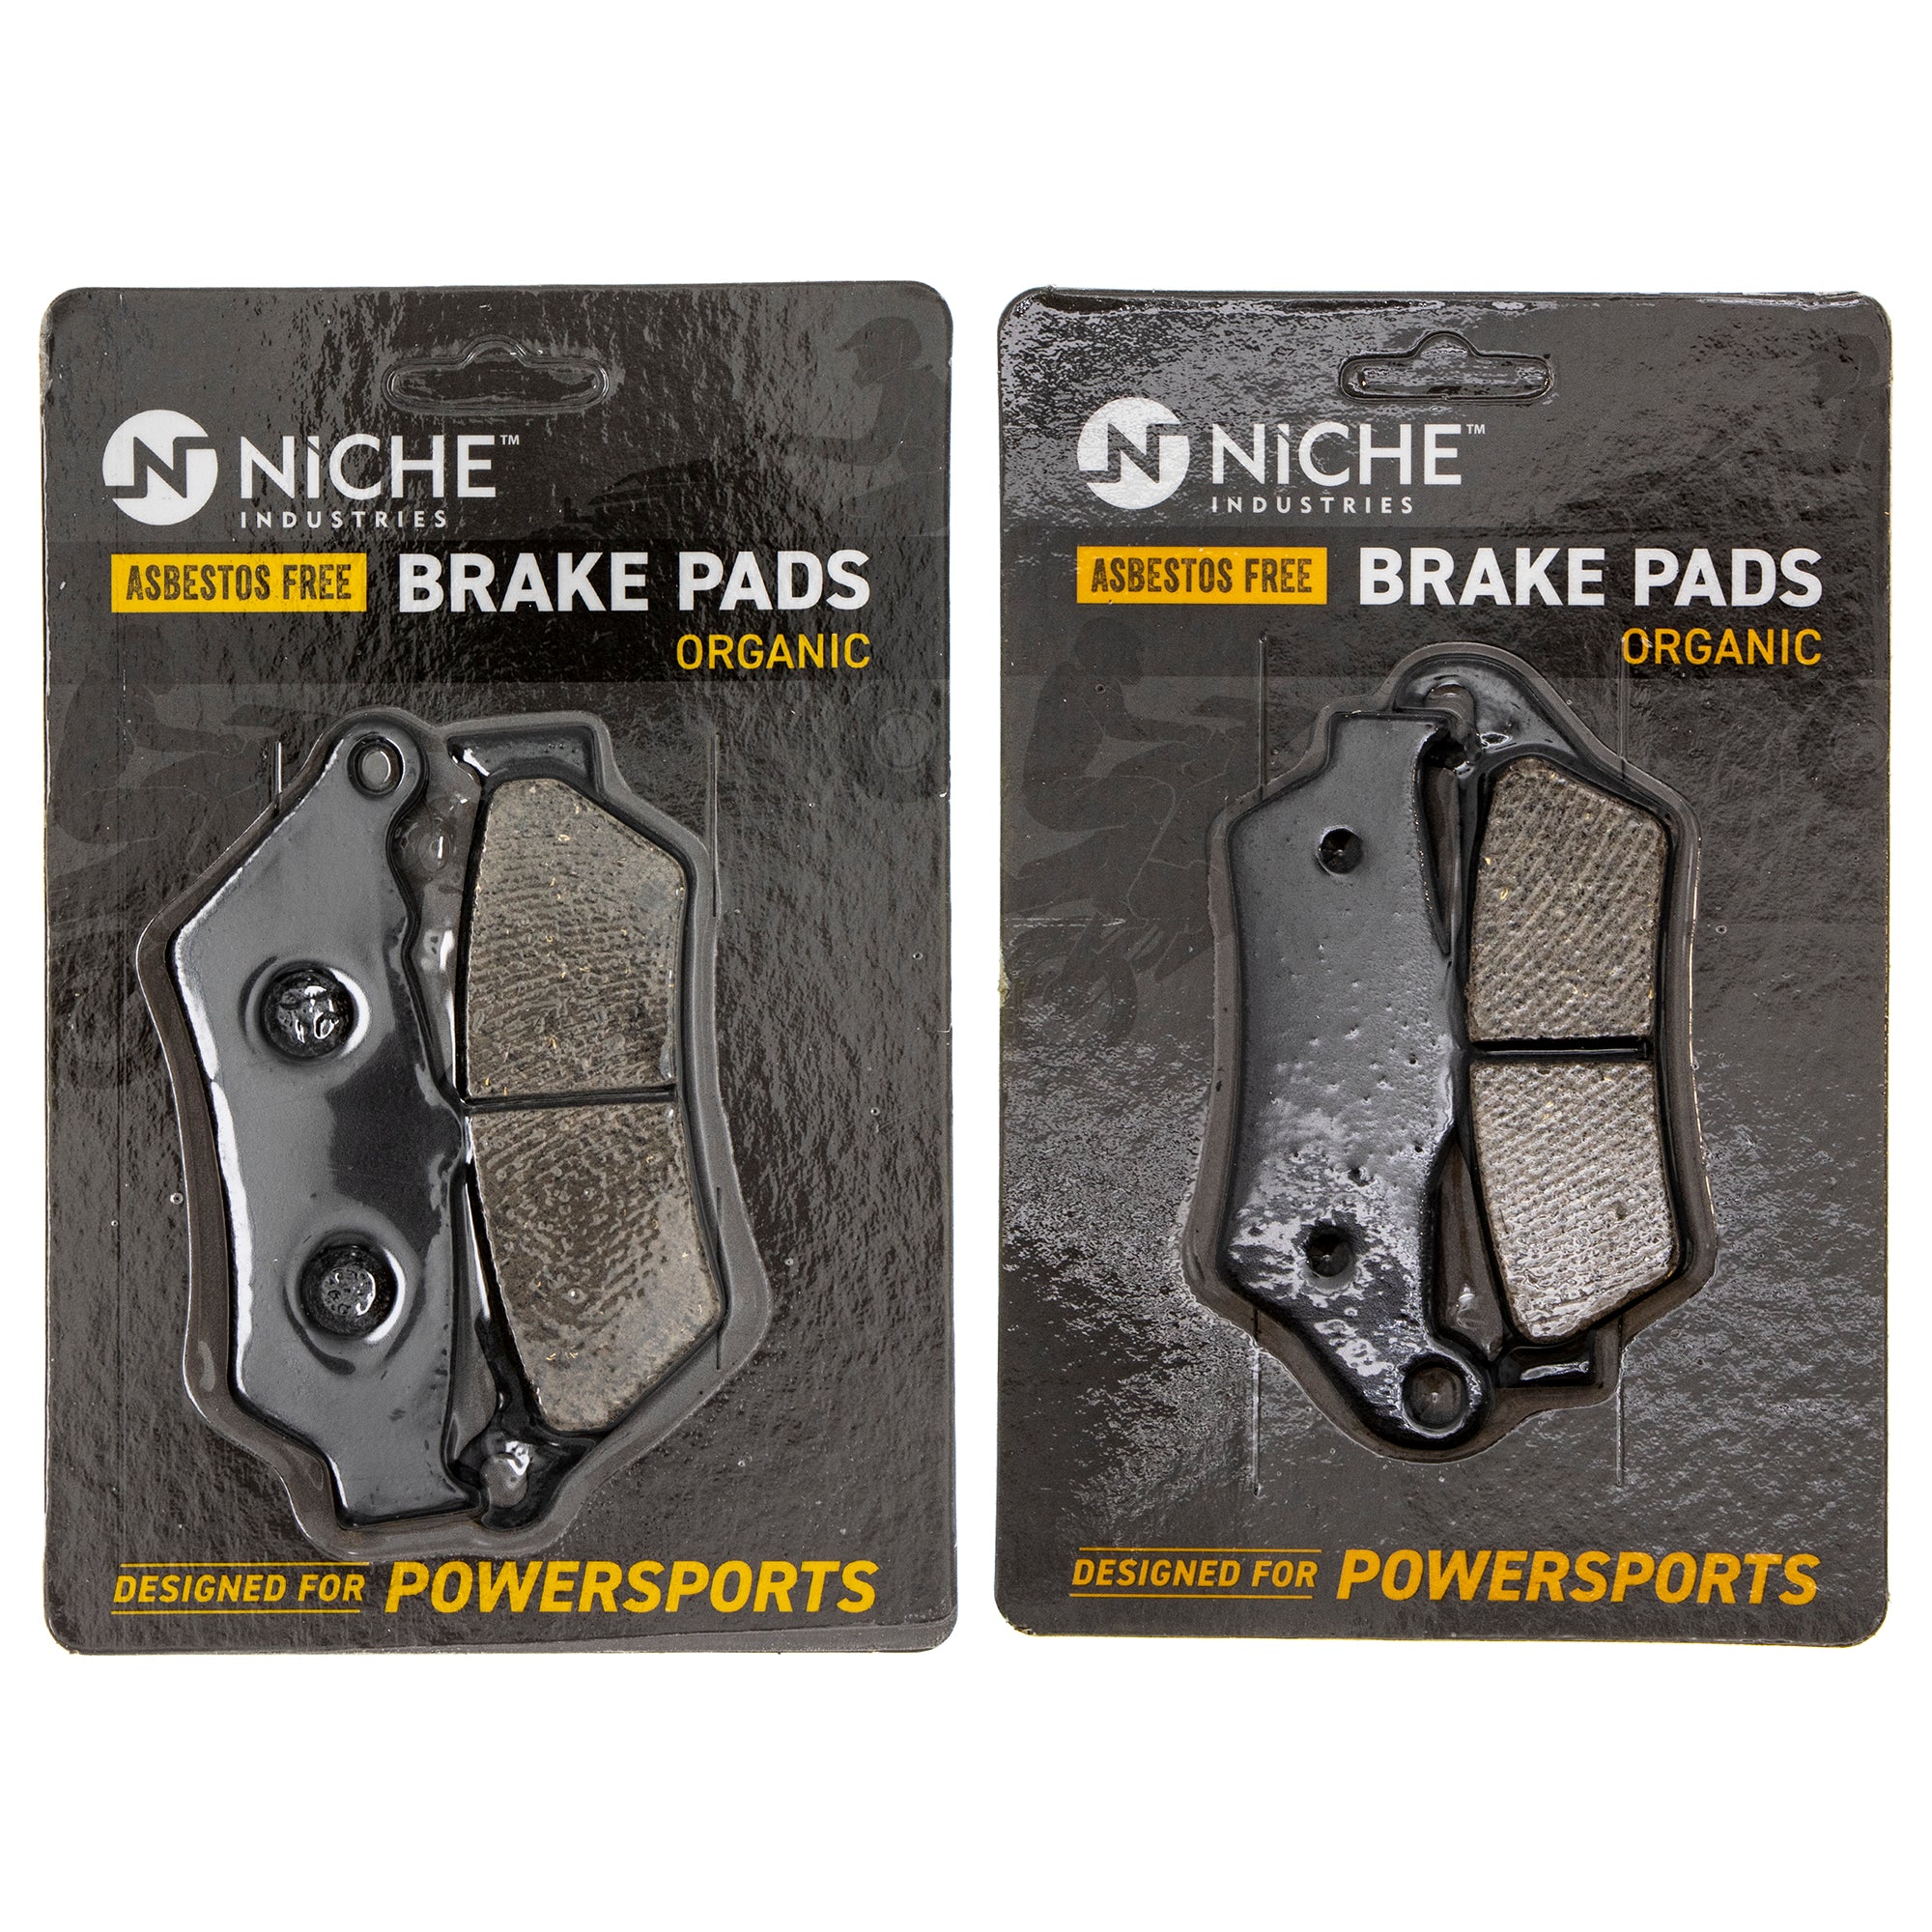 Brake Pad Kit Front/Rear for zOTHER BMW R1200RT R1200GS HP2 34217660281 34117651958 NICHE MK1002620